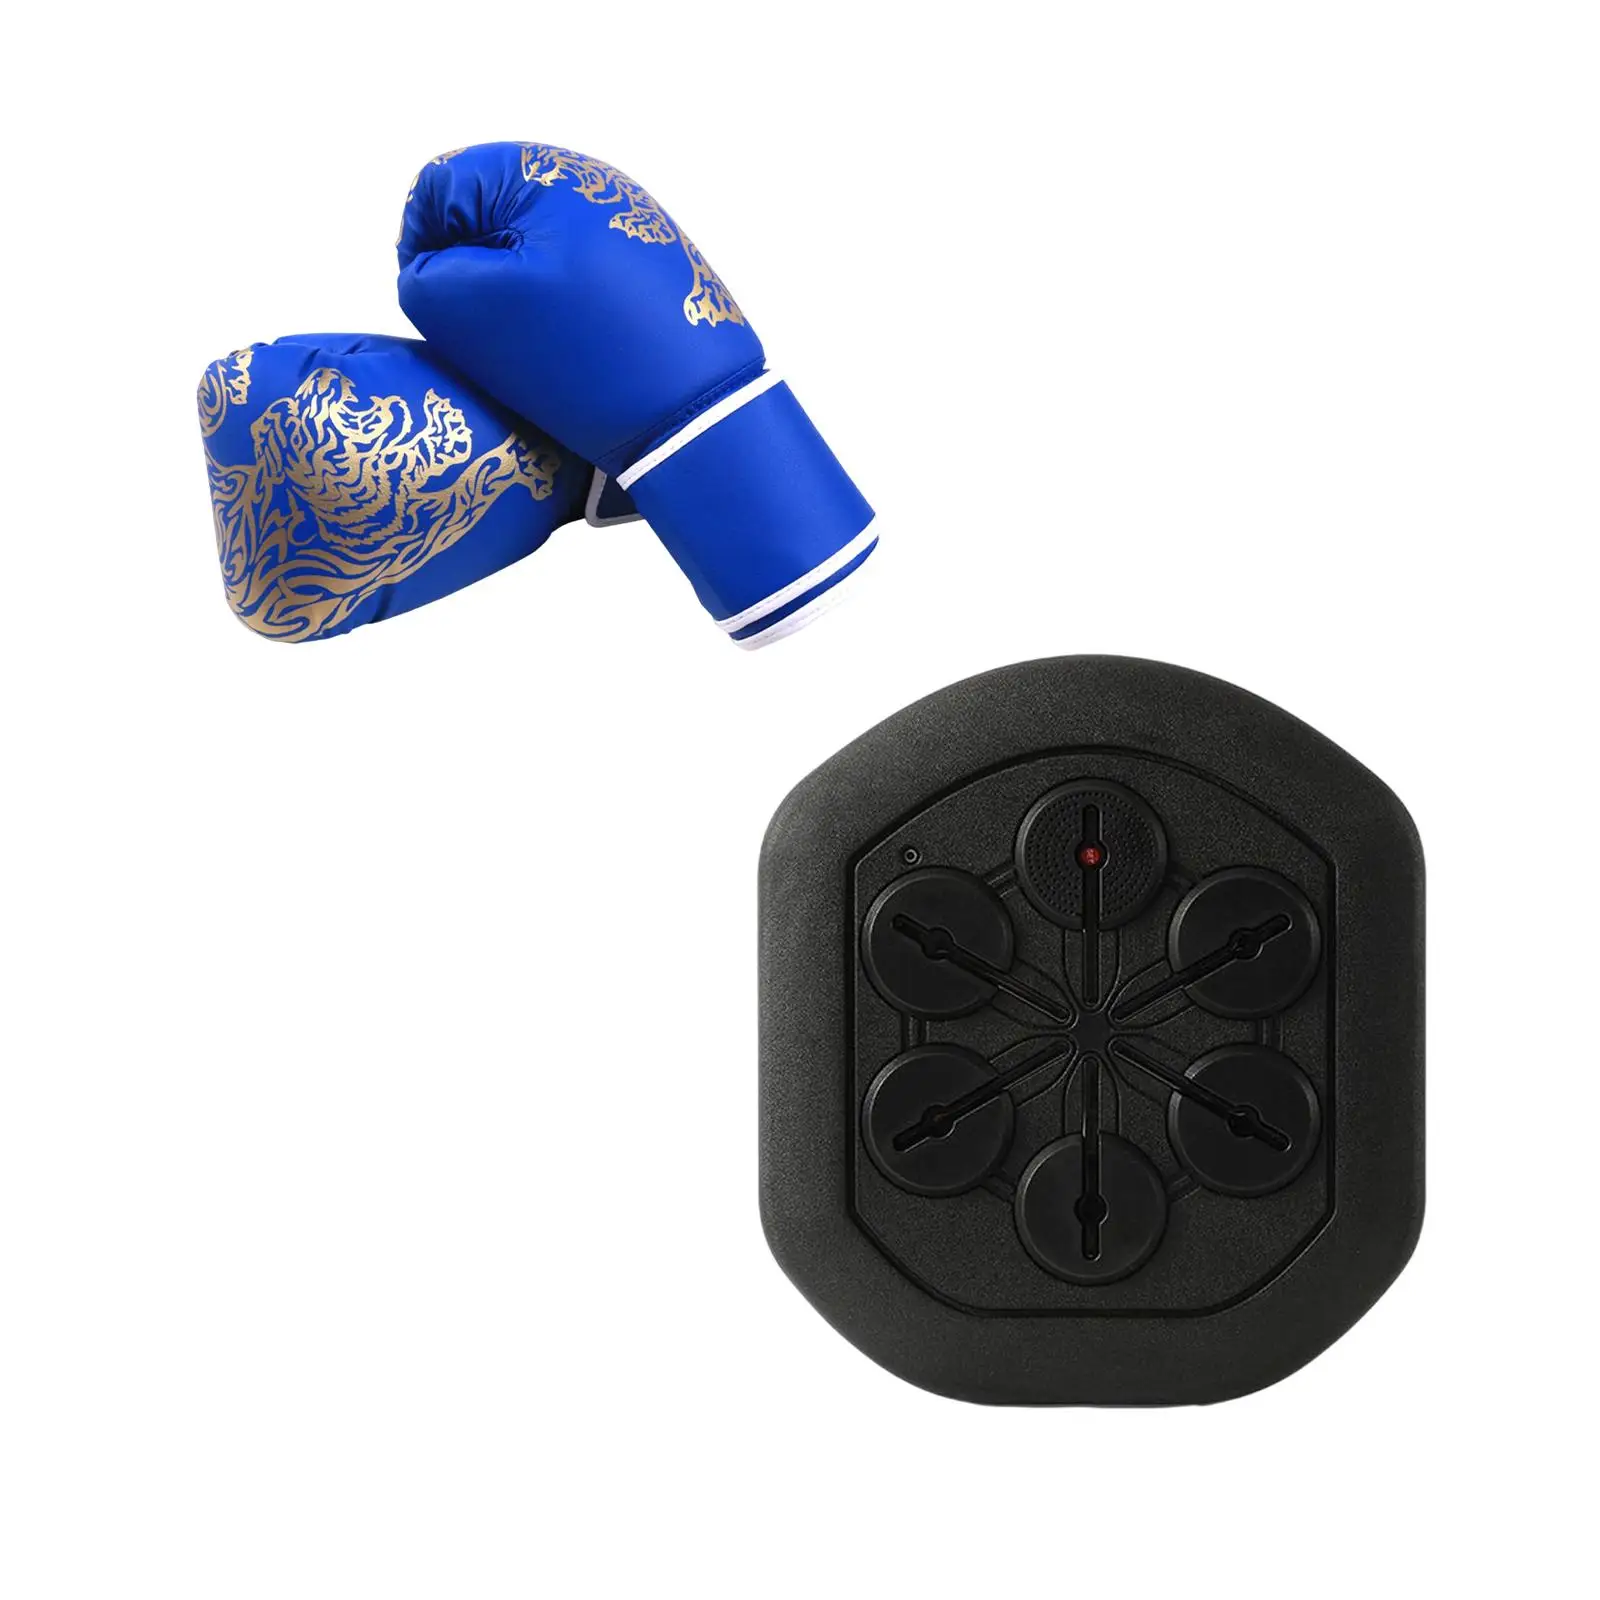 Smart Boxing Wall Target Agility Training Reaction Target Wall Mounted Boxing Machine for Kids Adults with Boxing Gloves